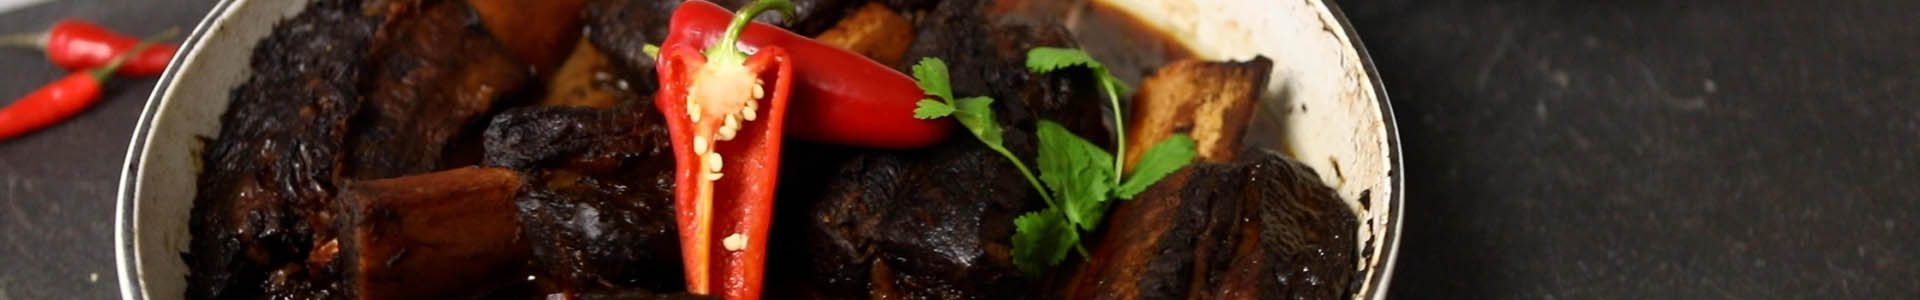 Slow Cooked Asian Style Beef Short Ribs Recipe 